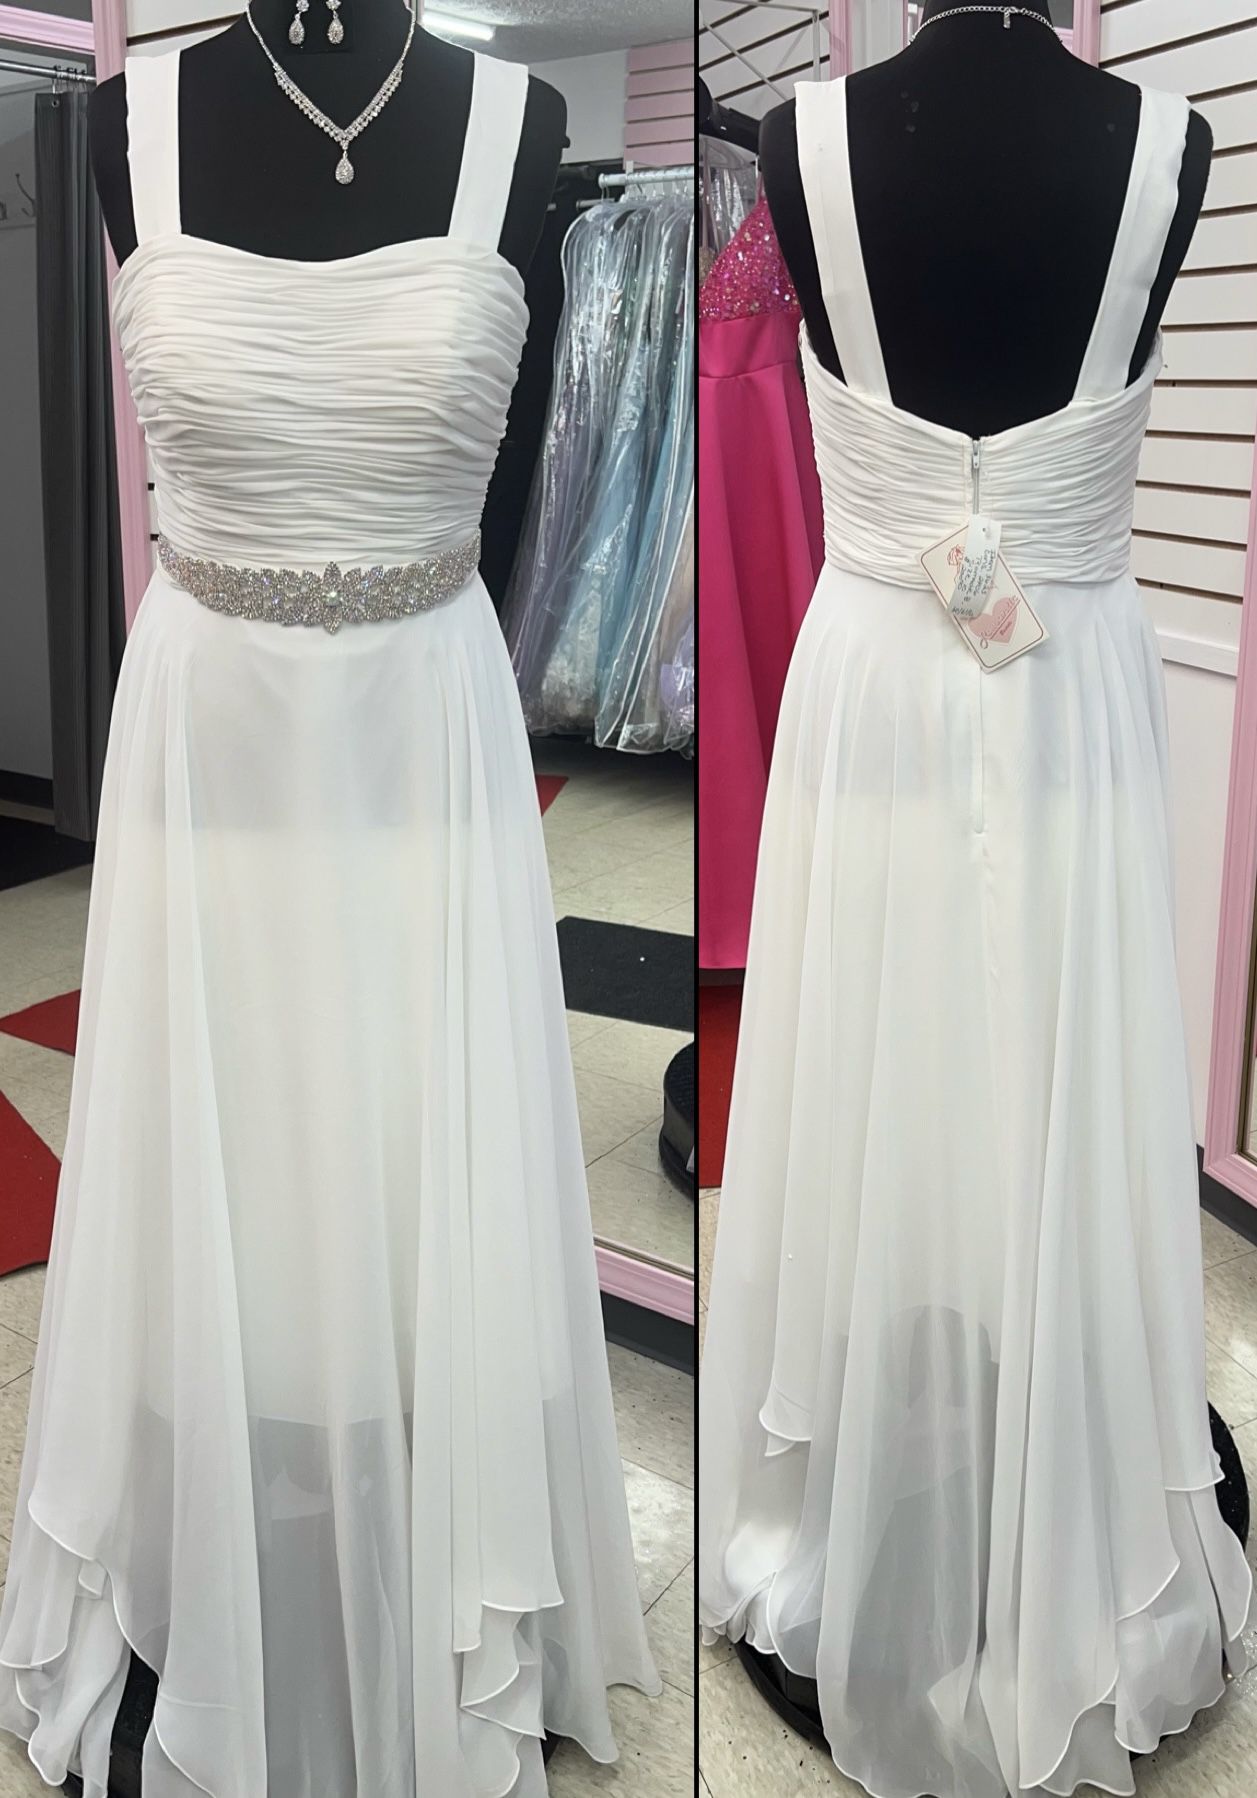 New With Tags Chiffon Wedding Gown & Wedding Dress ONLY $200